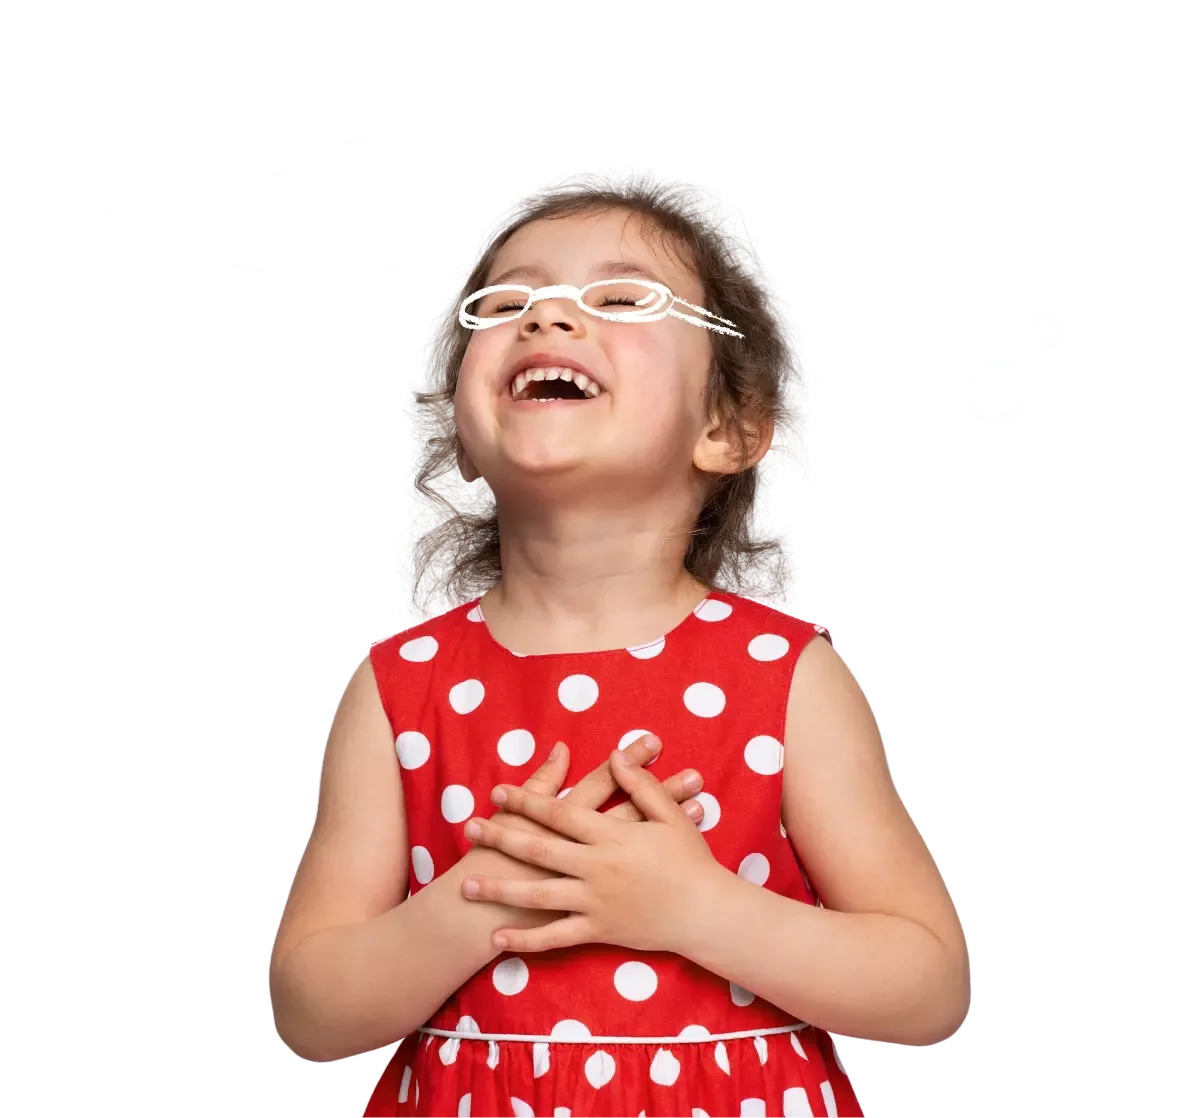 Smiling child with playful illustration